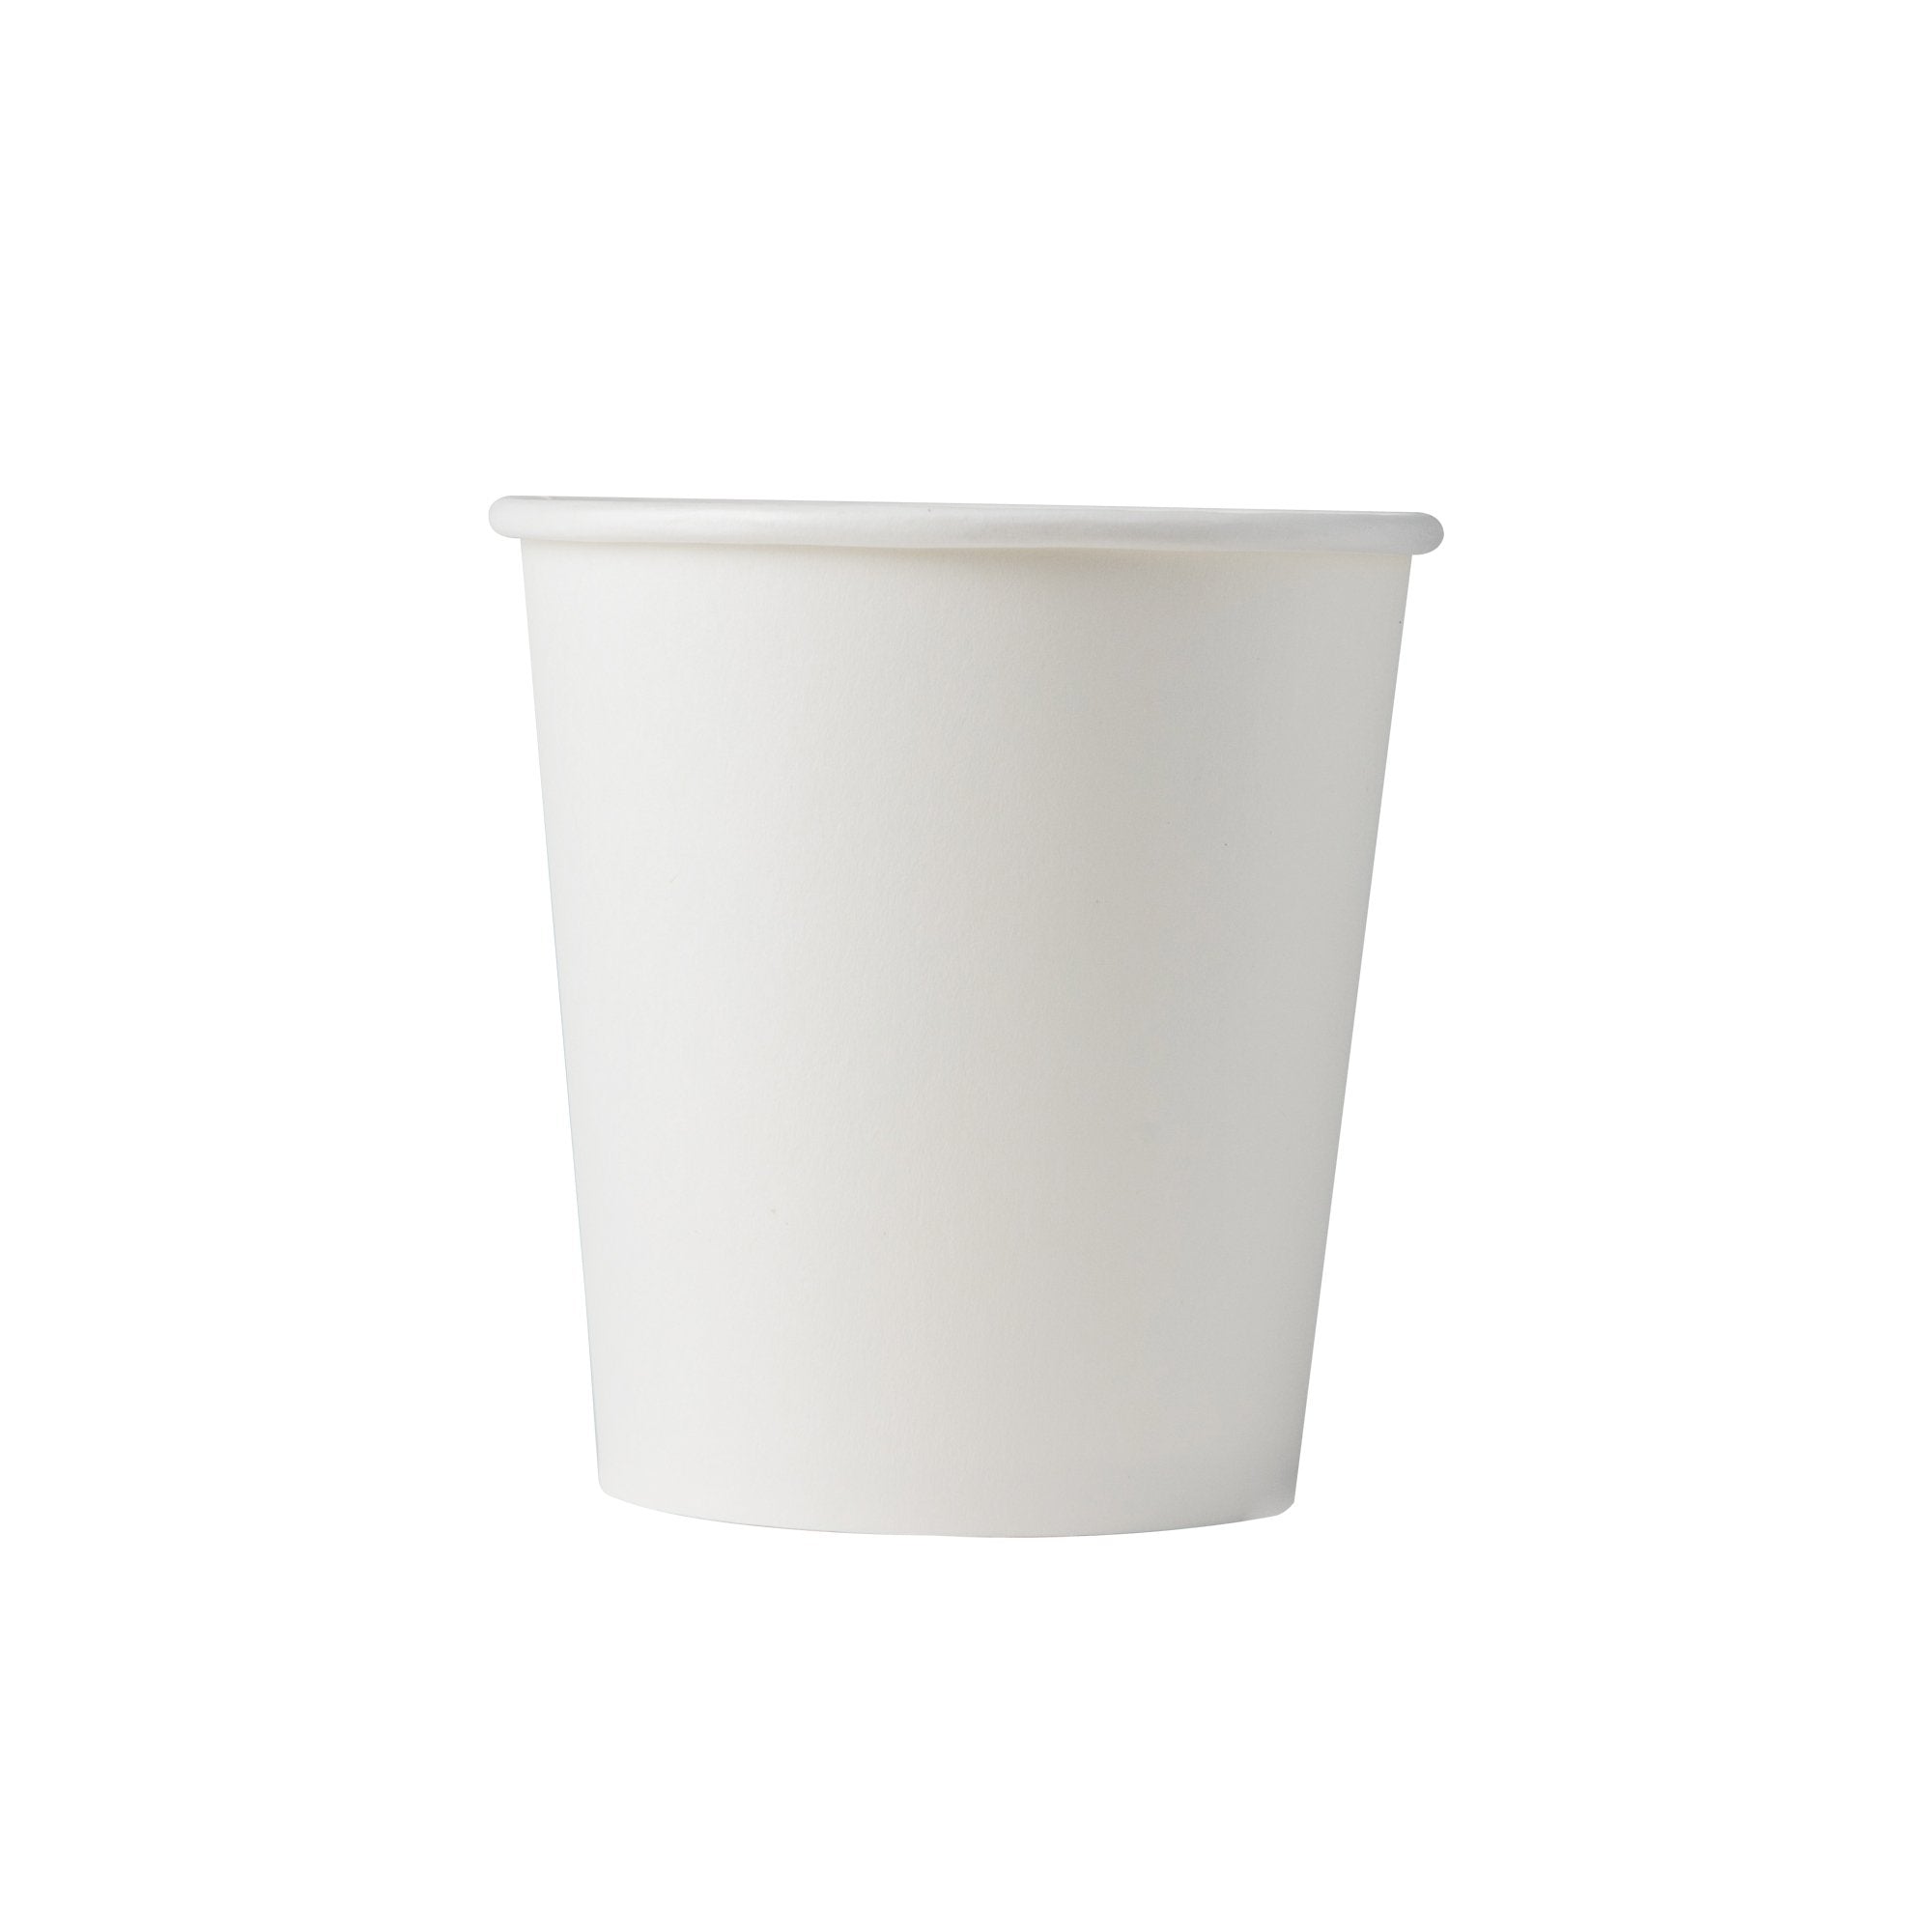 Choice 10 oz. Kraft Poly Paper Cold Cup - 1000/Case